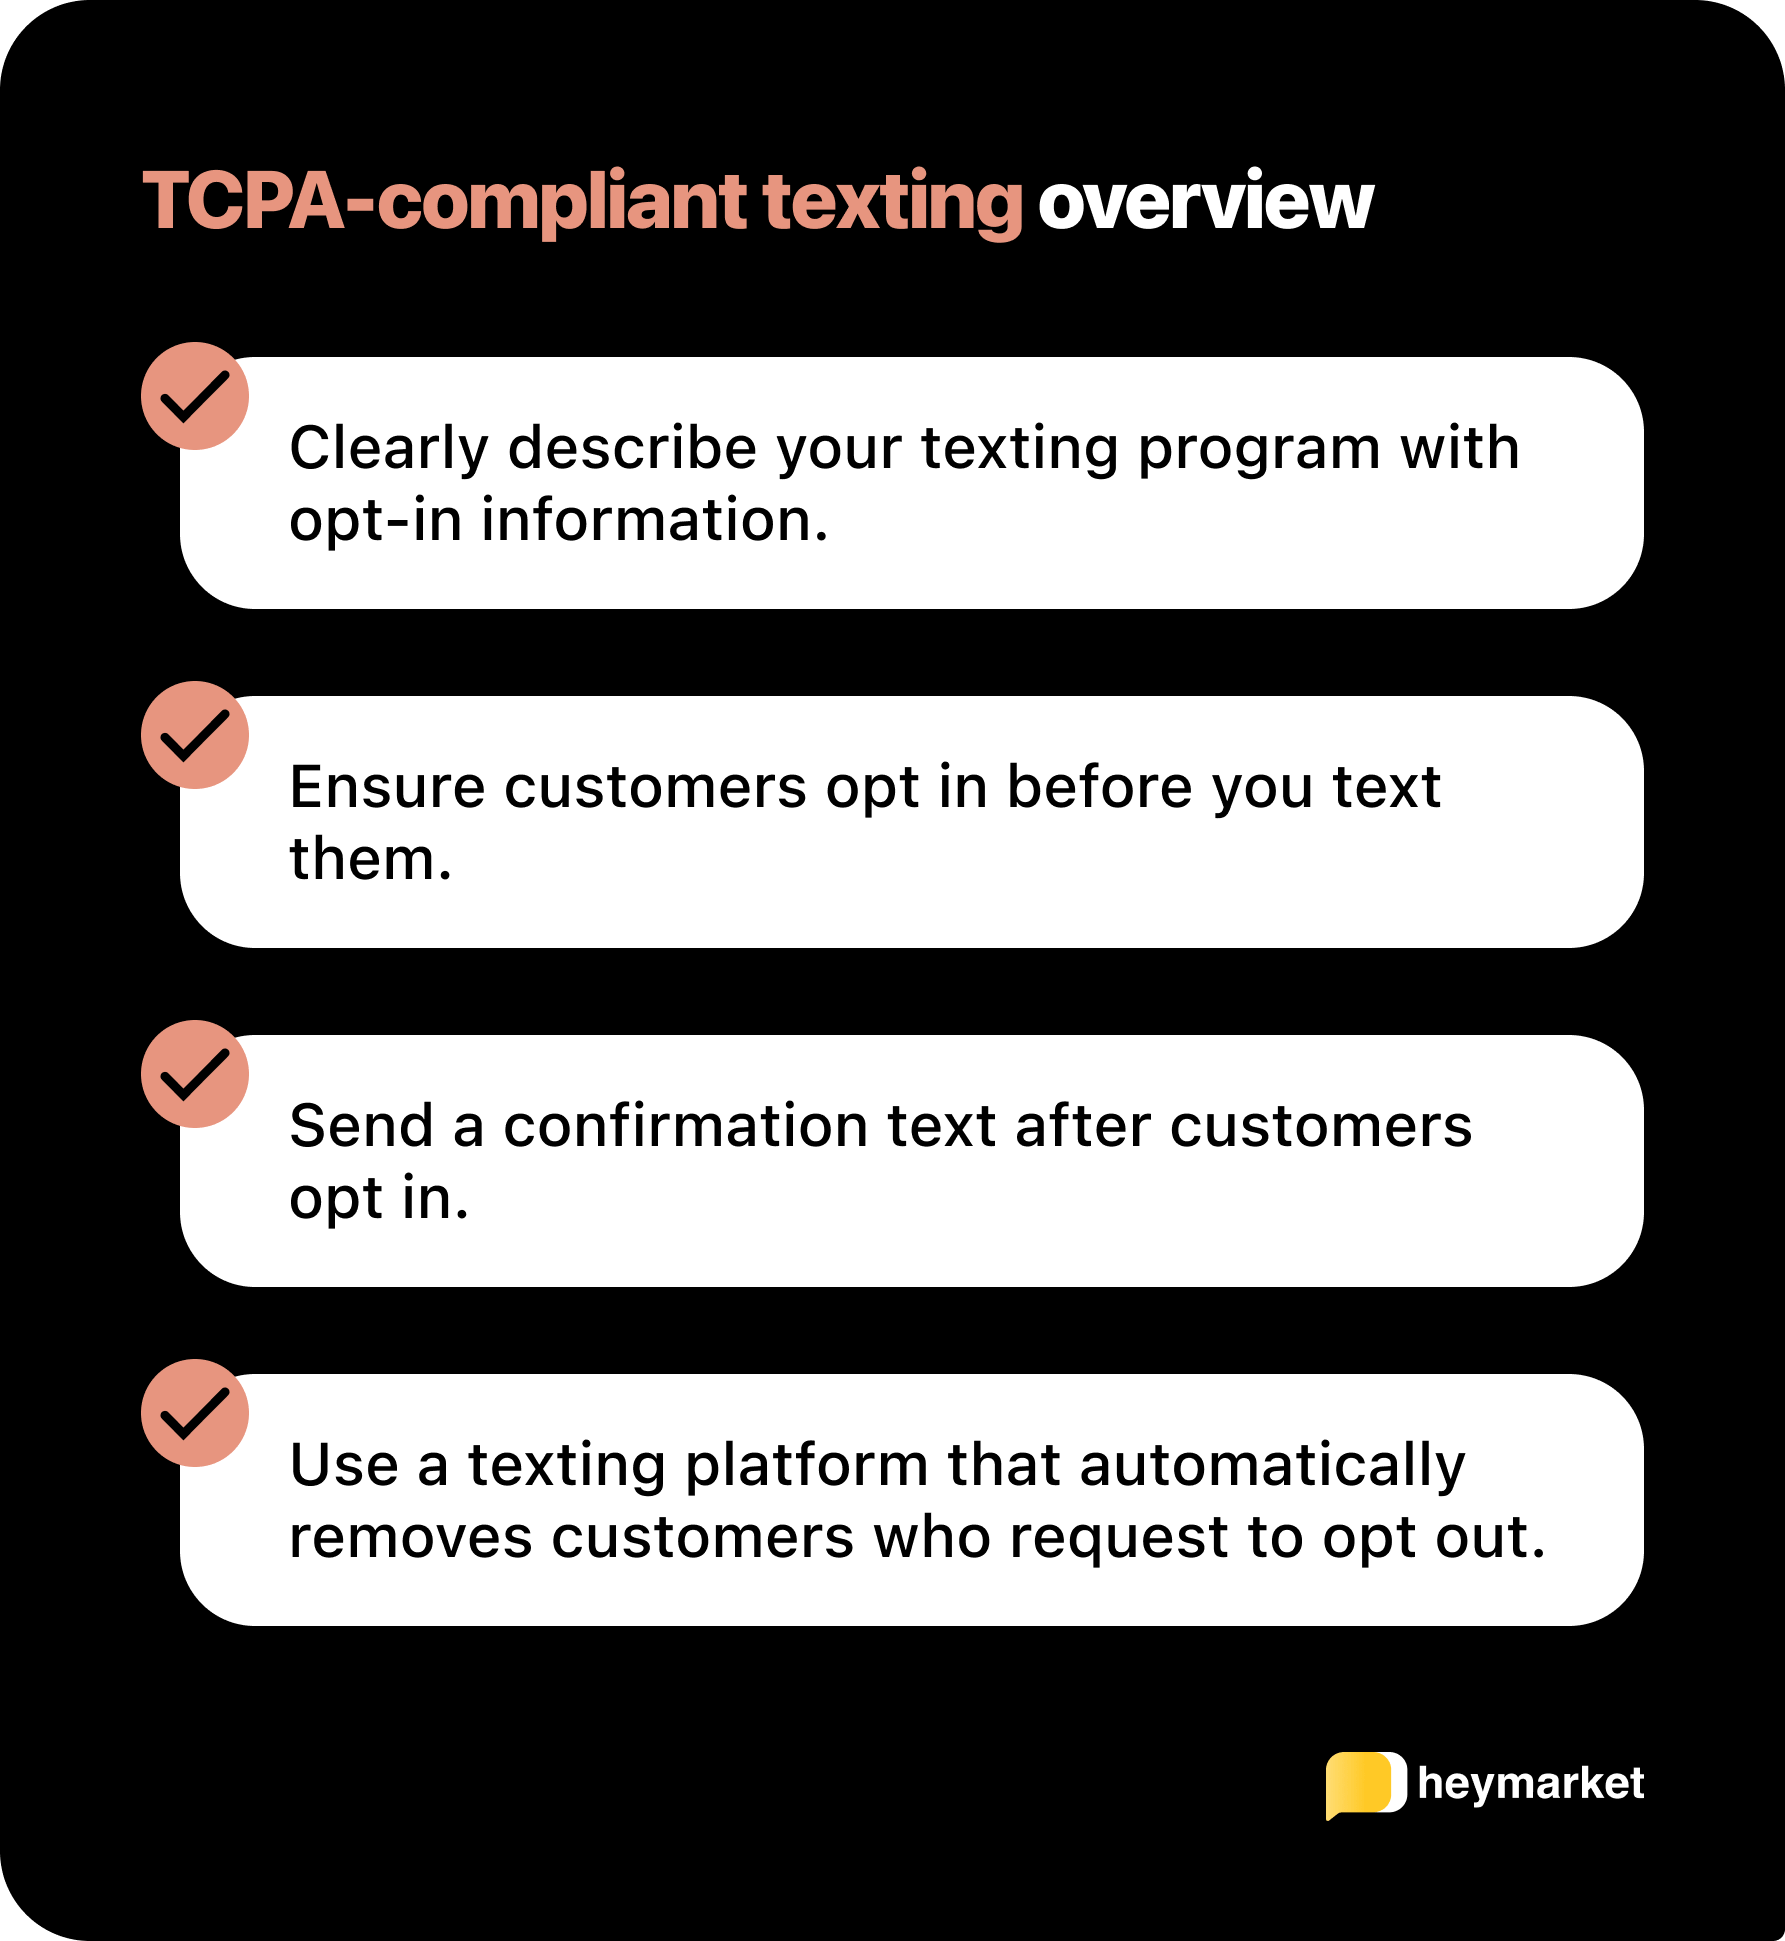 Summary of TCPA text messaging compliance